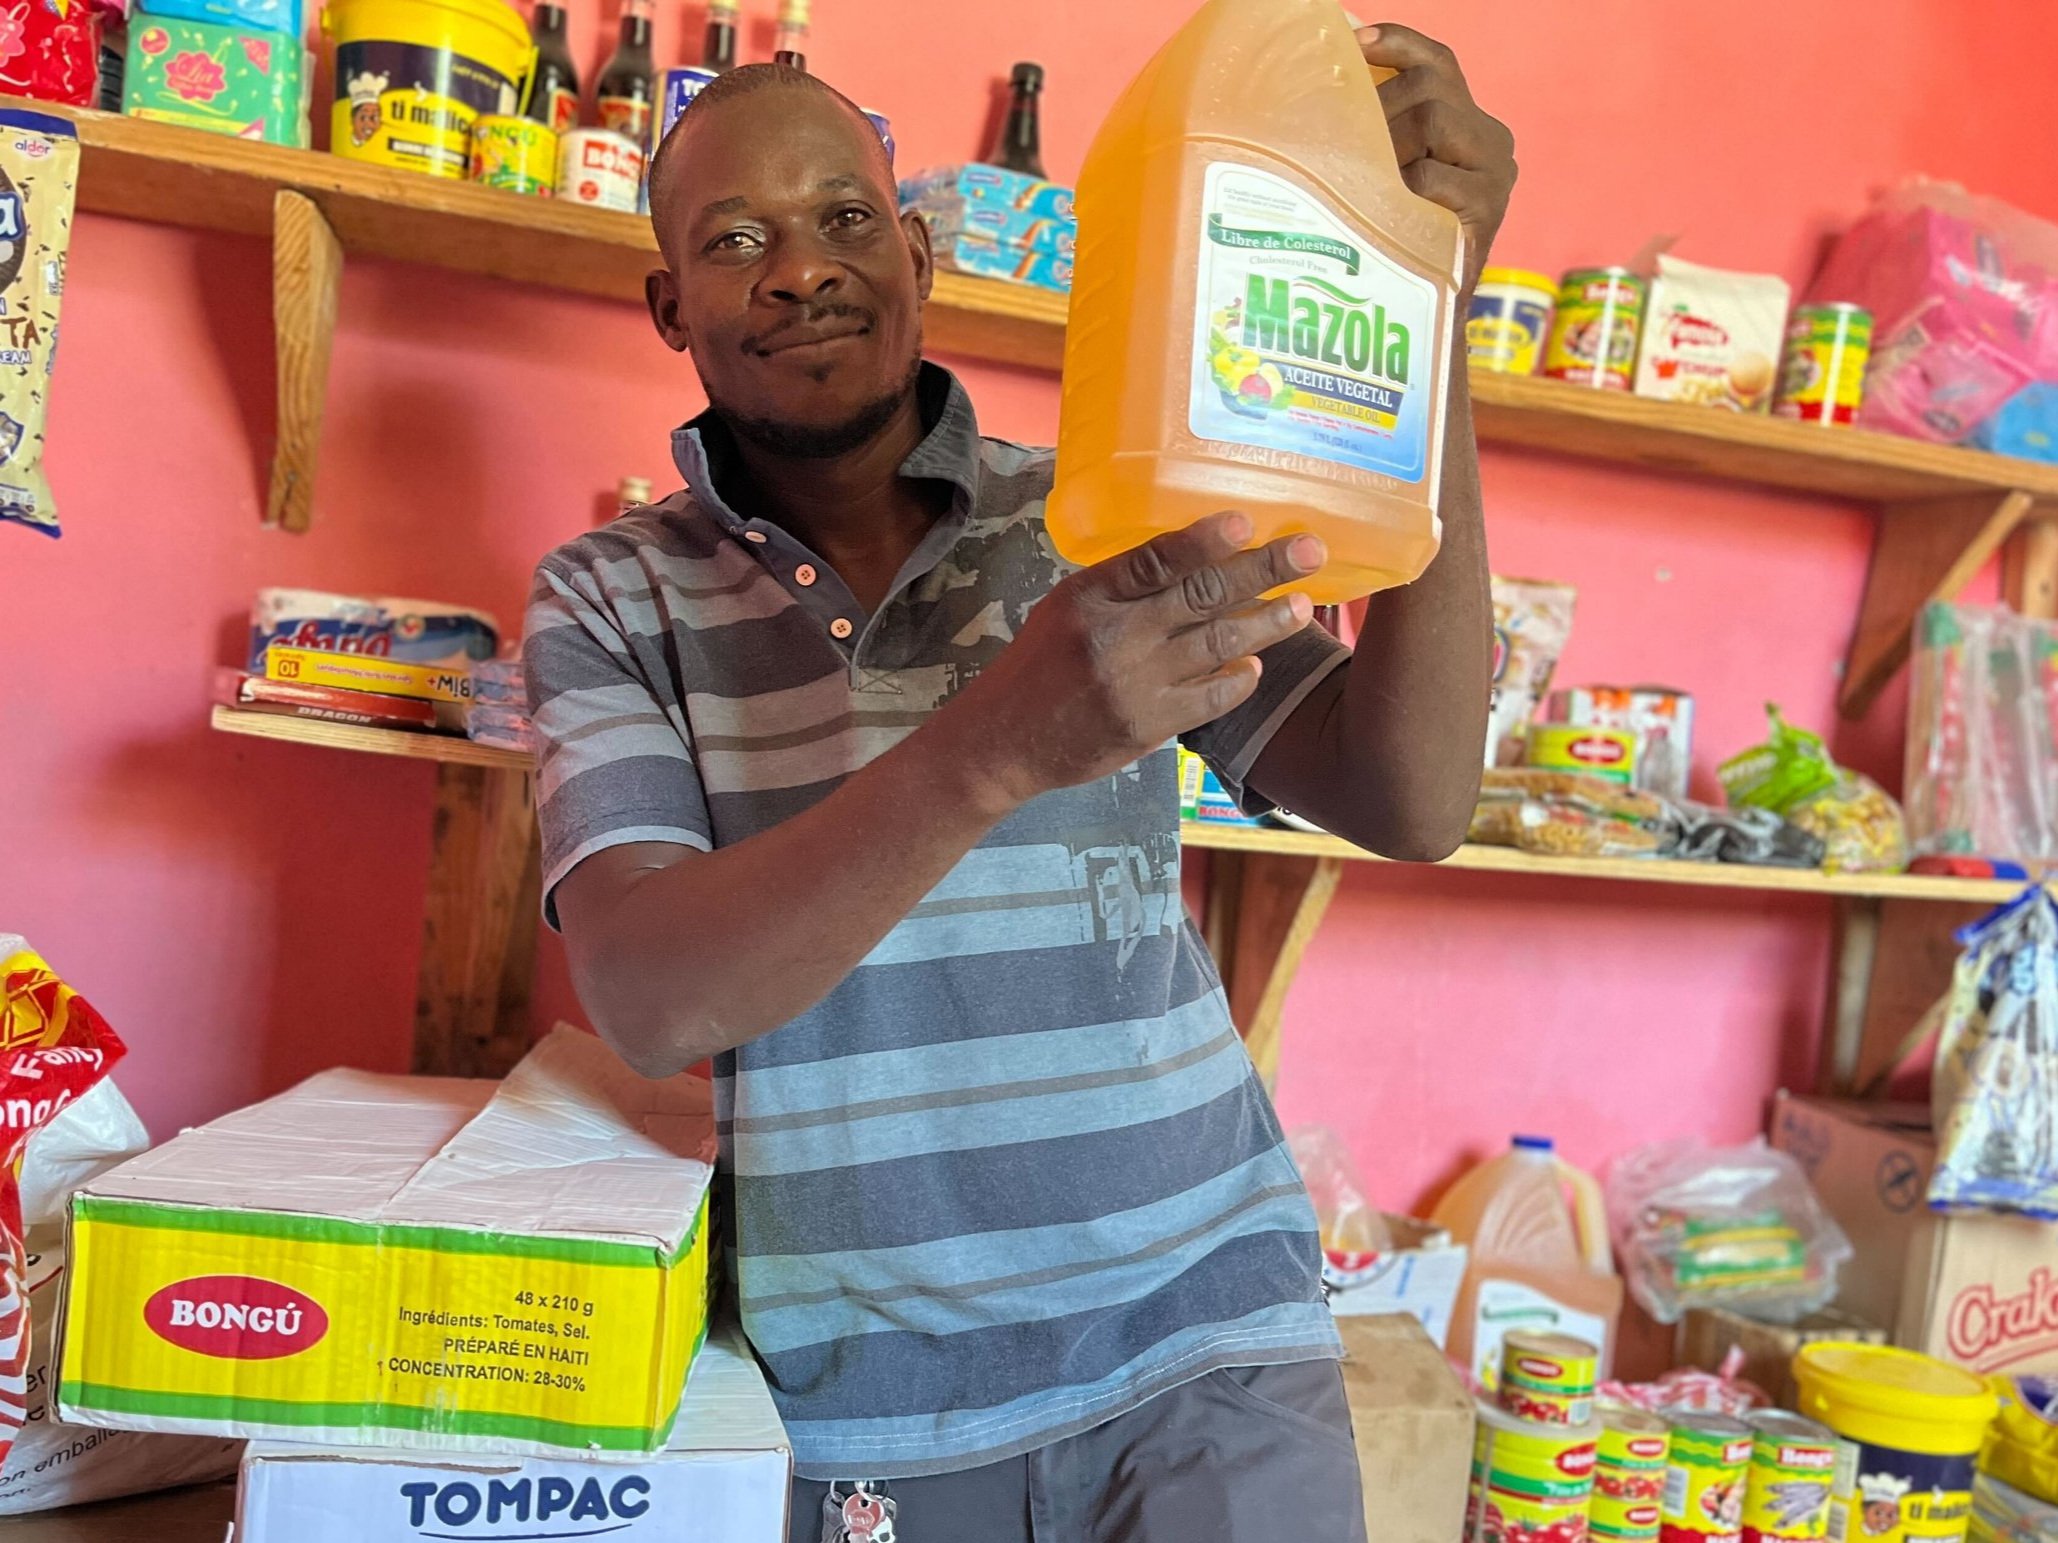  Renaud is a participant in our current cohort of our Small Business Program. As a builder, he also built his stop with his own two hands. Brick by brick, shelf by shelf, and with some of our support, filled with inventory to sell to his neighbors. 